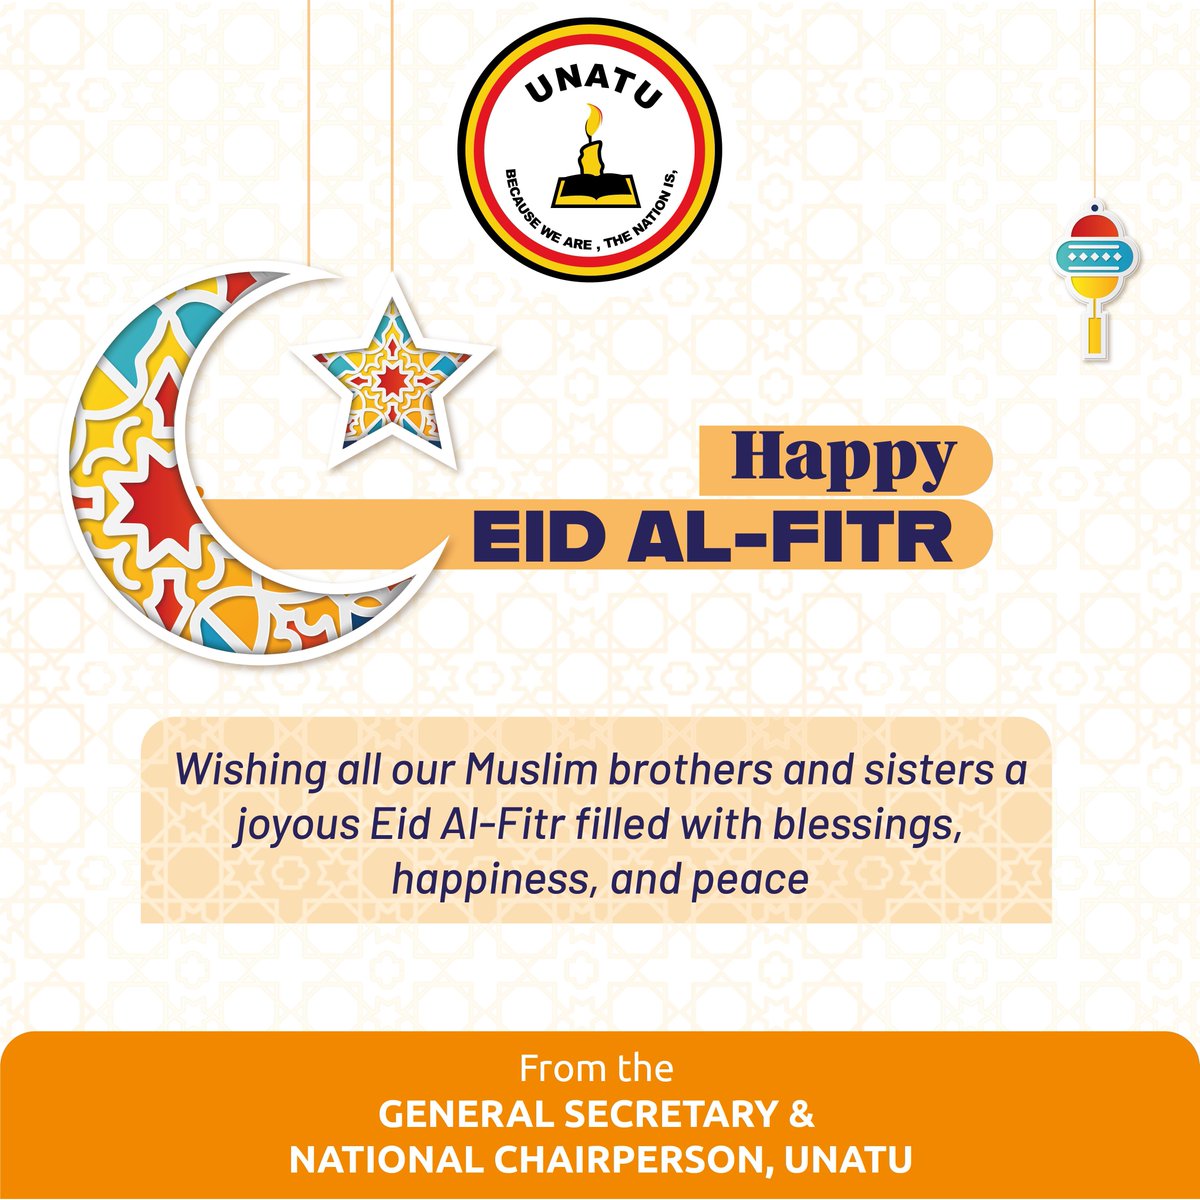 Happy #EID-AL-FITR to all our muslim brothers and sisters. May this EID be filled with Blessings and peace for you and your families